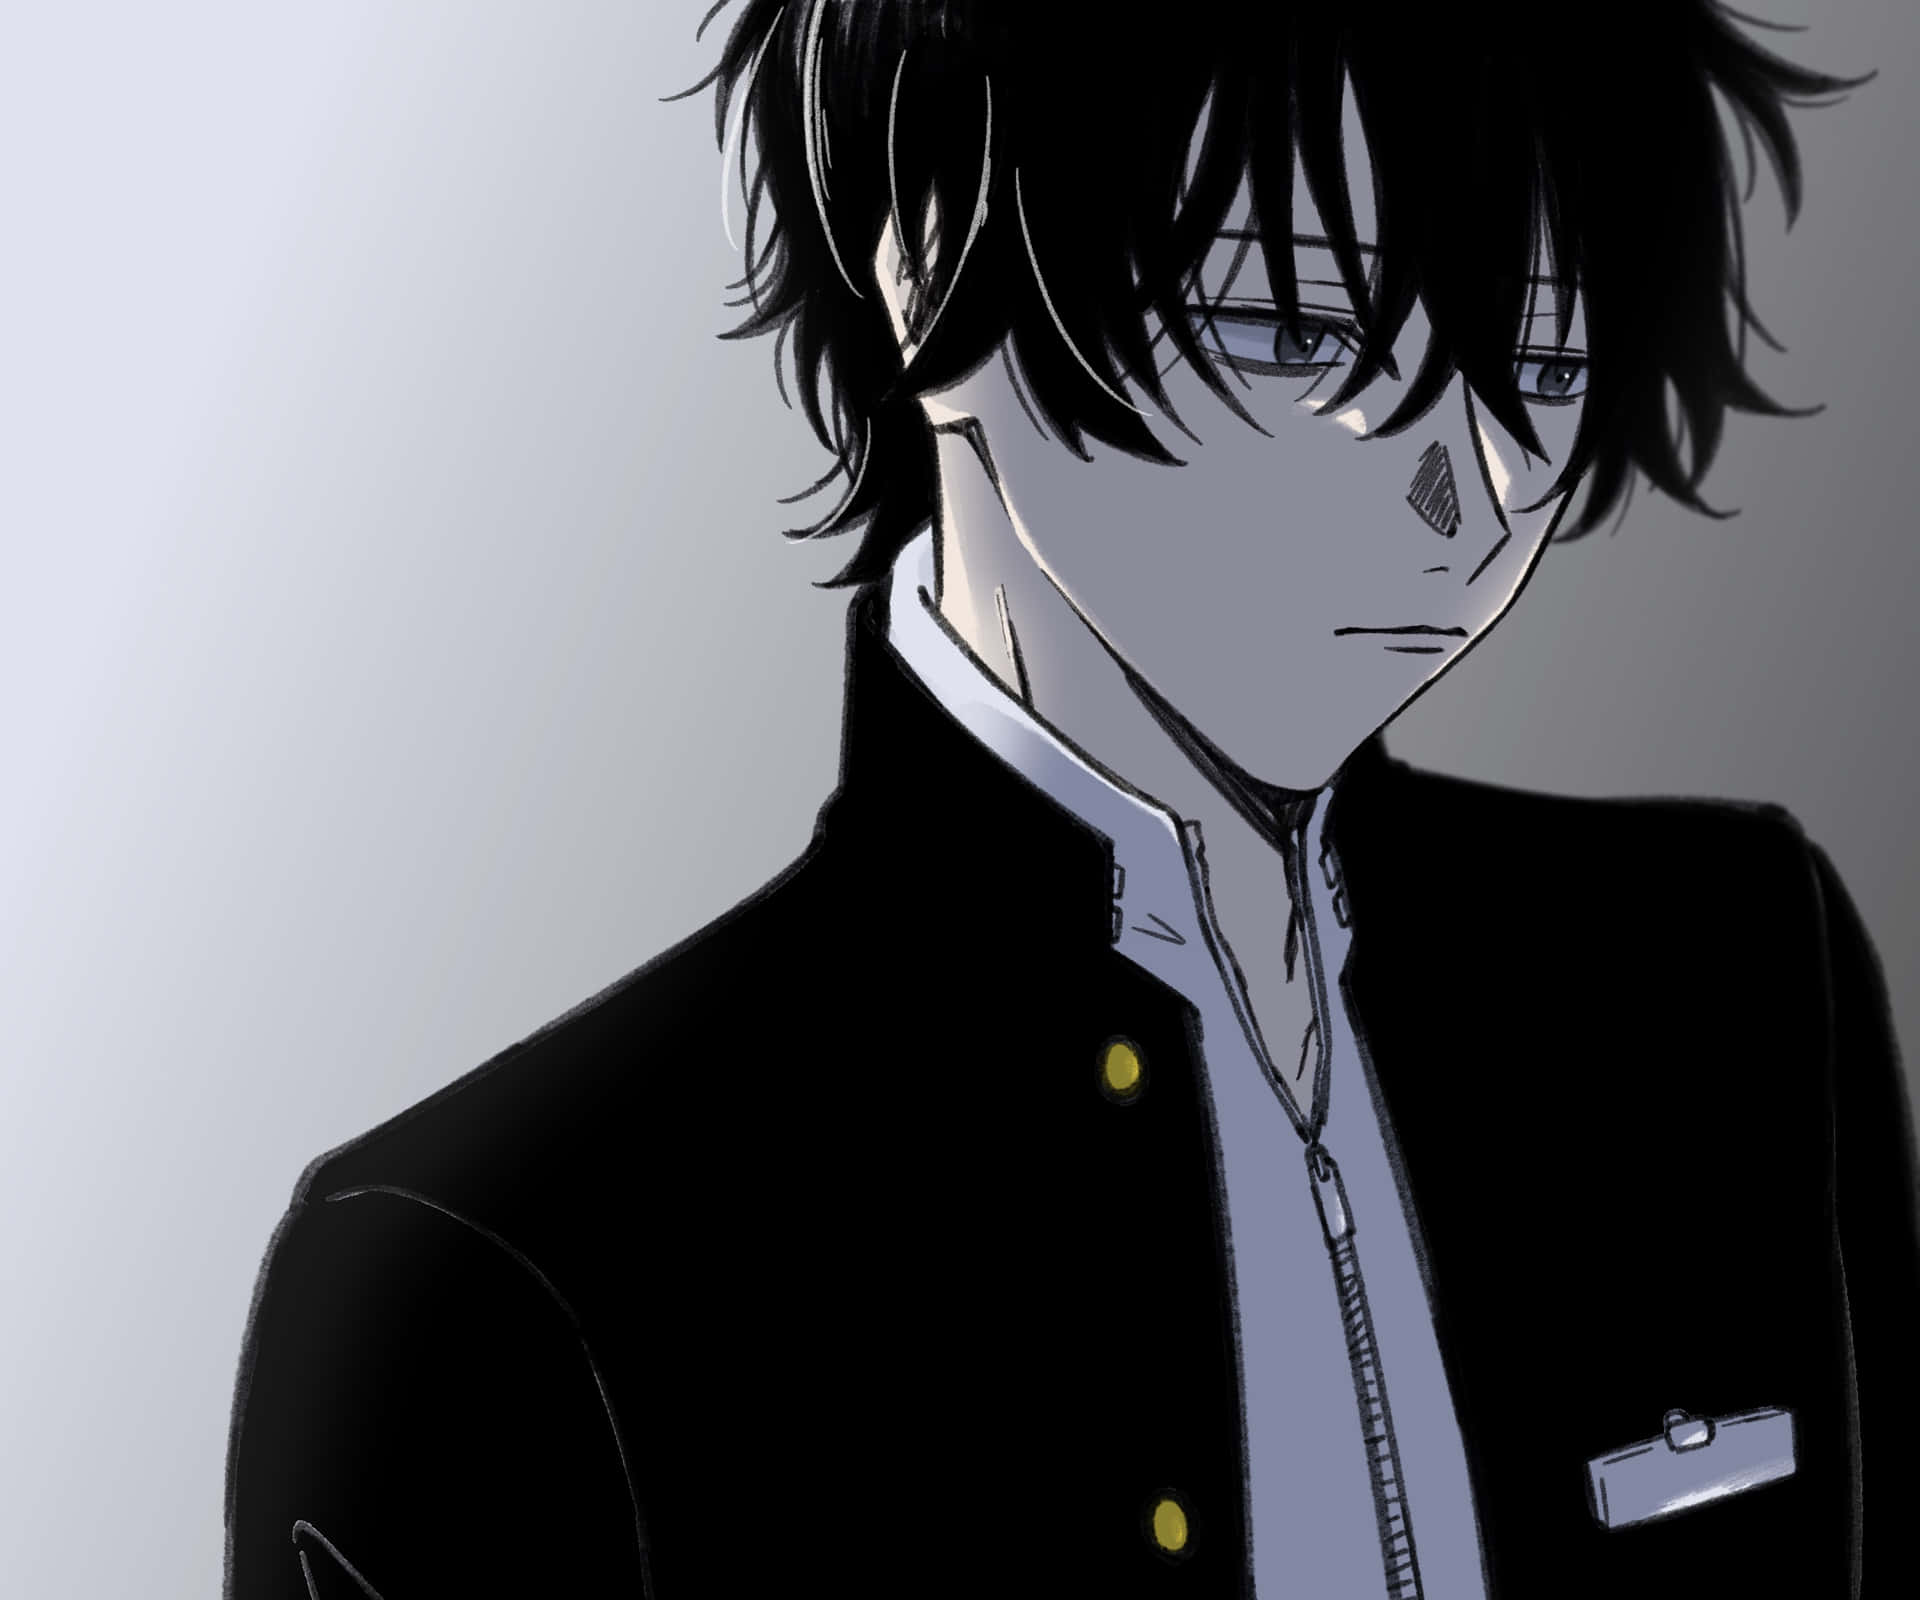 Tomodachi Game Anime Character Brooding Look Wallpaper